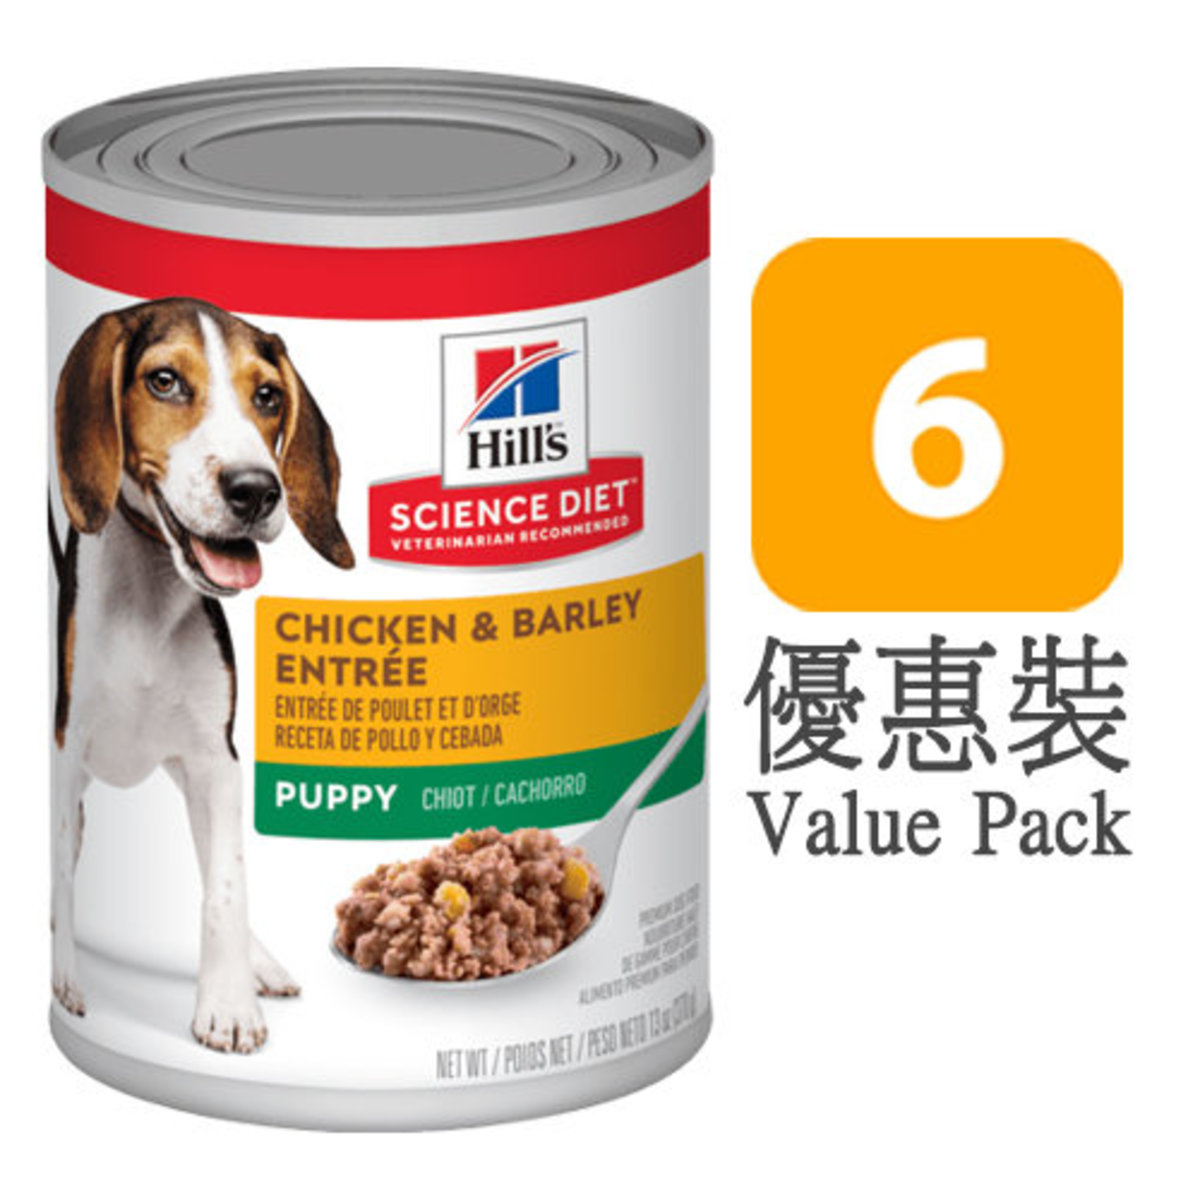 Puppy - Canned Chicken & Barley Entrée (13oz x 6) Wet Can Dog Food  7036_6